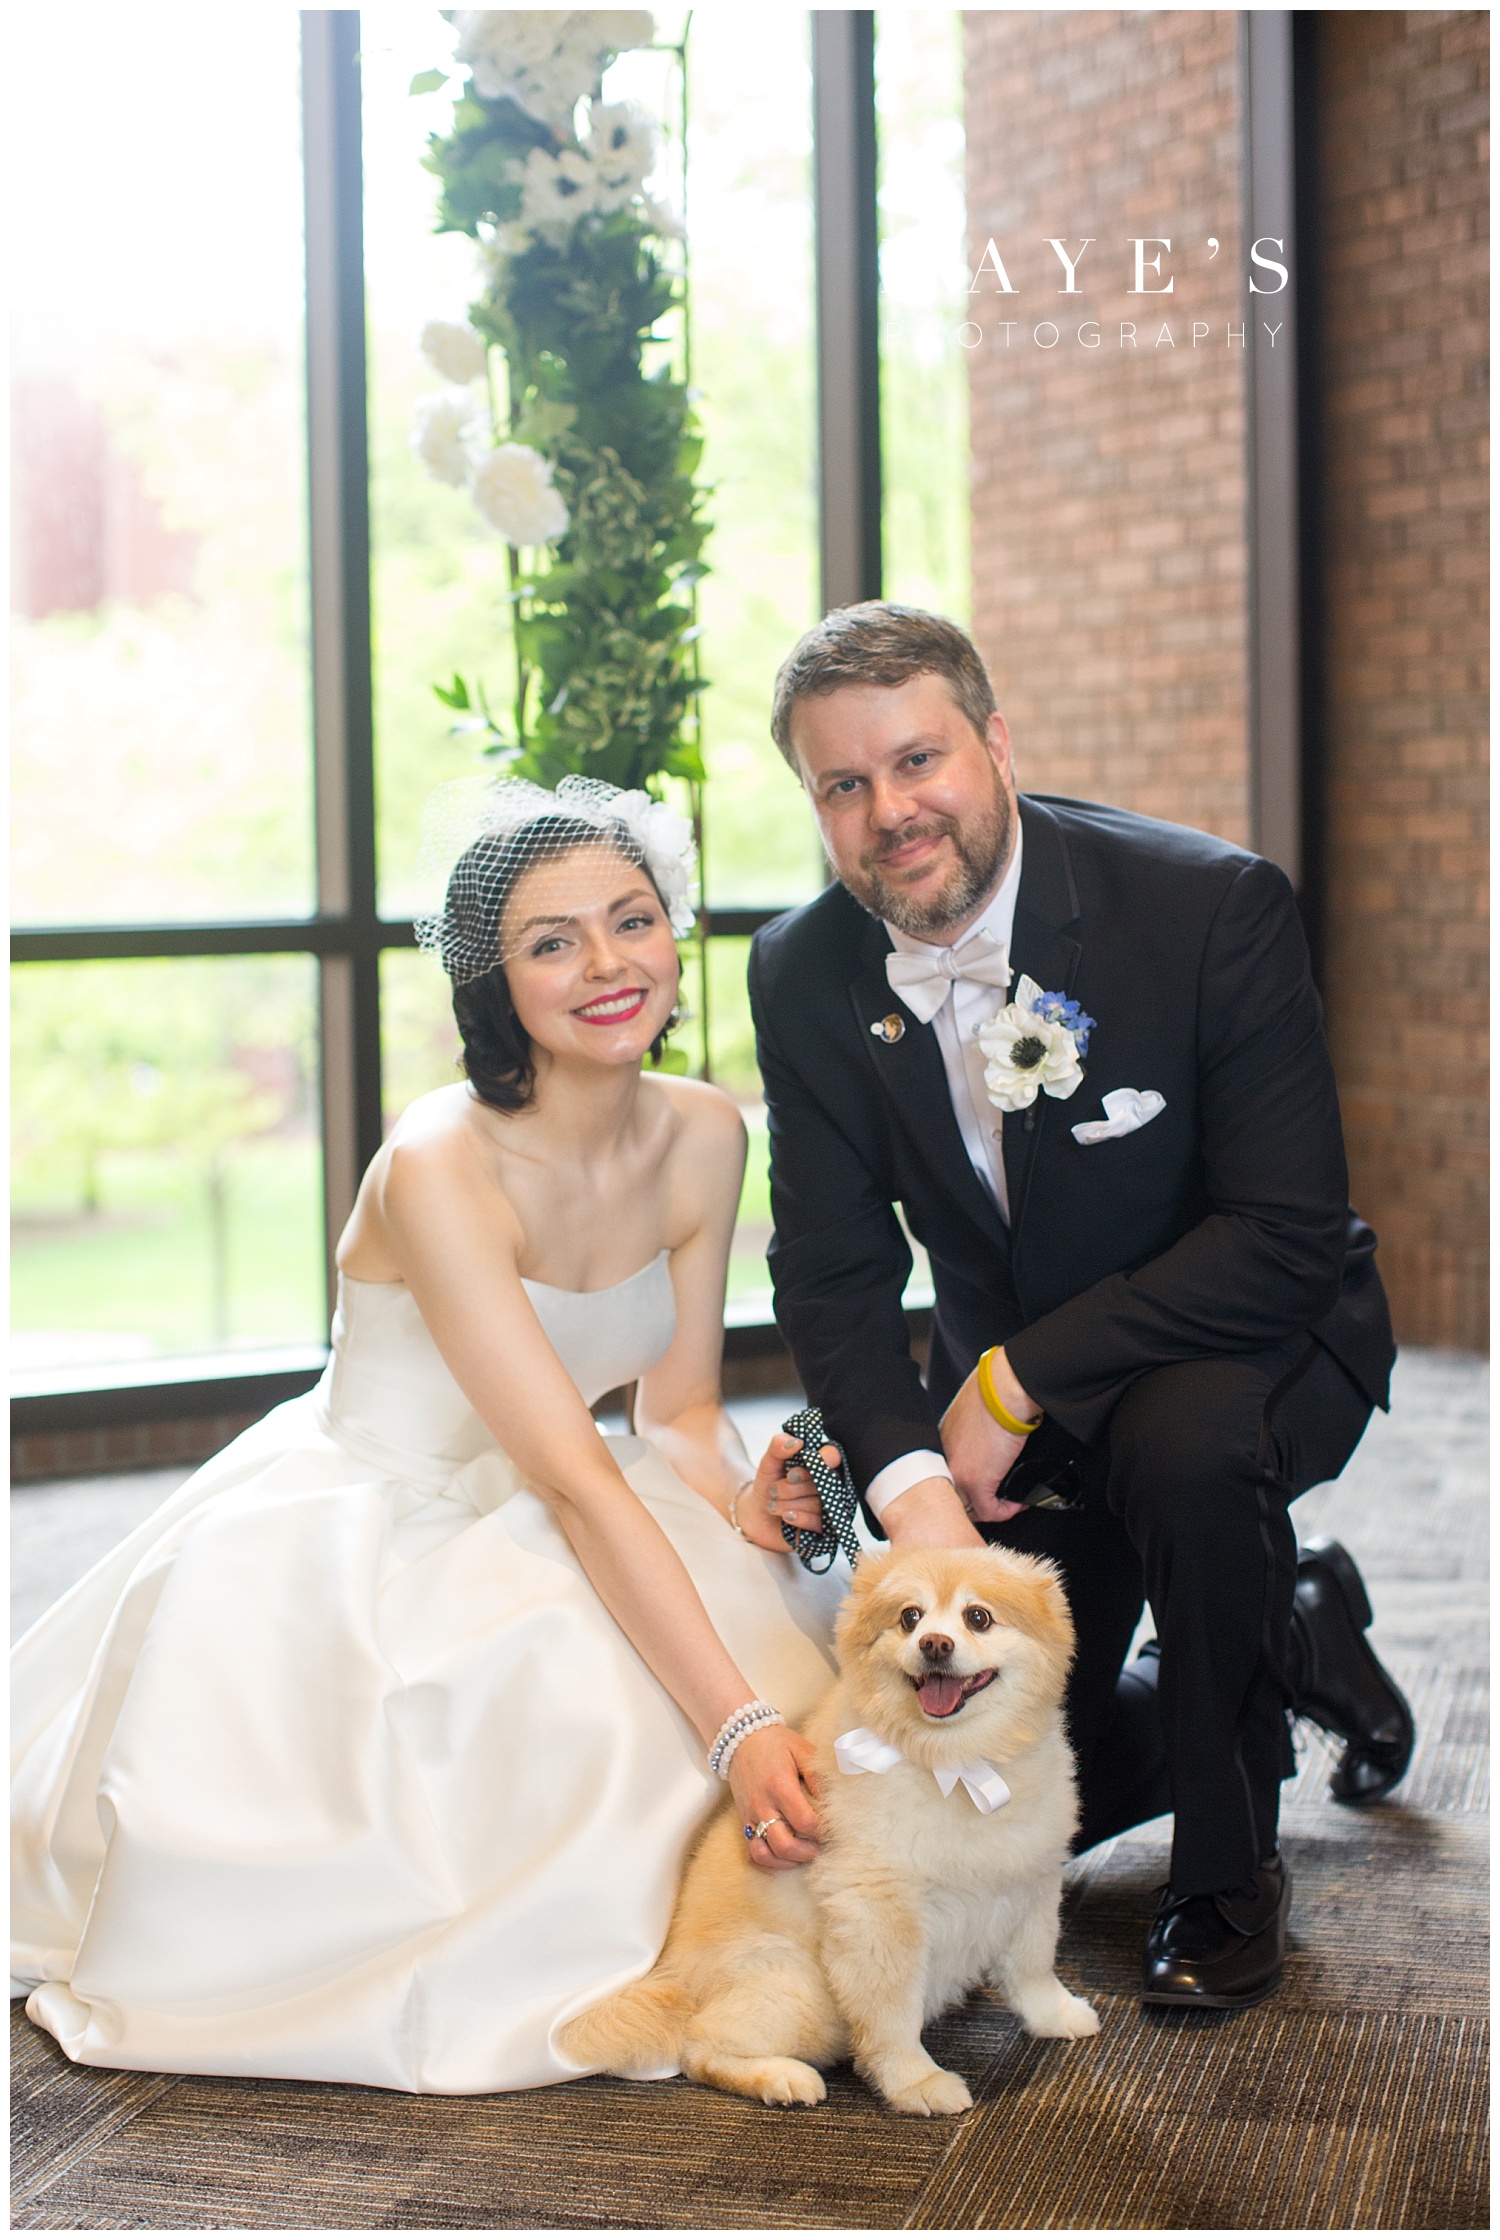 bride and groom with dog during wedding photos after the wedding ceremony